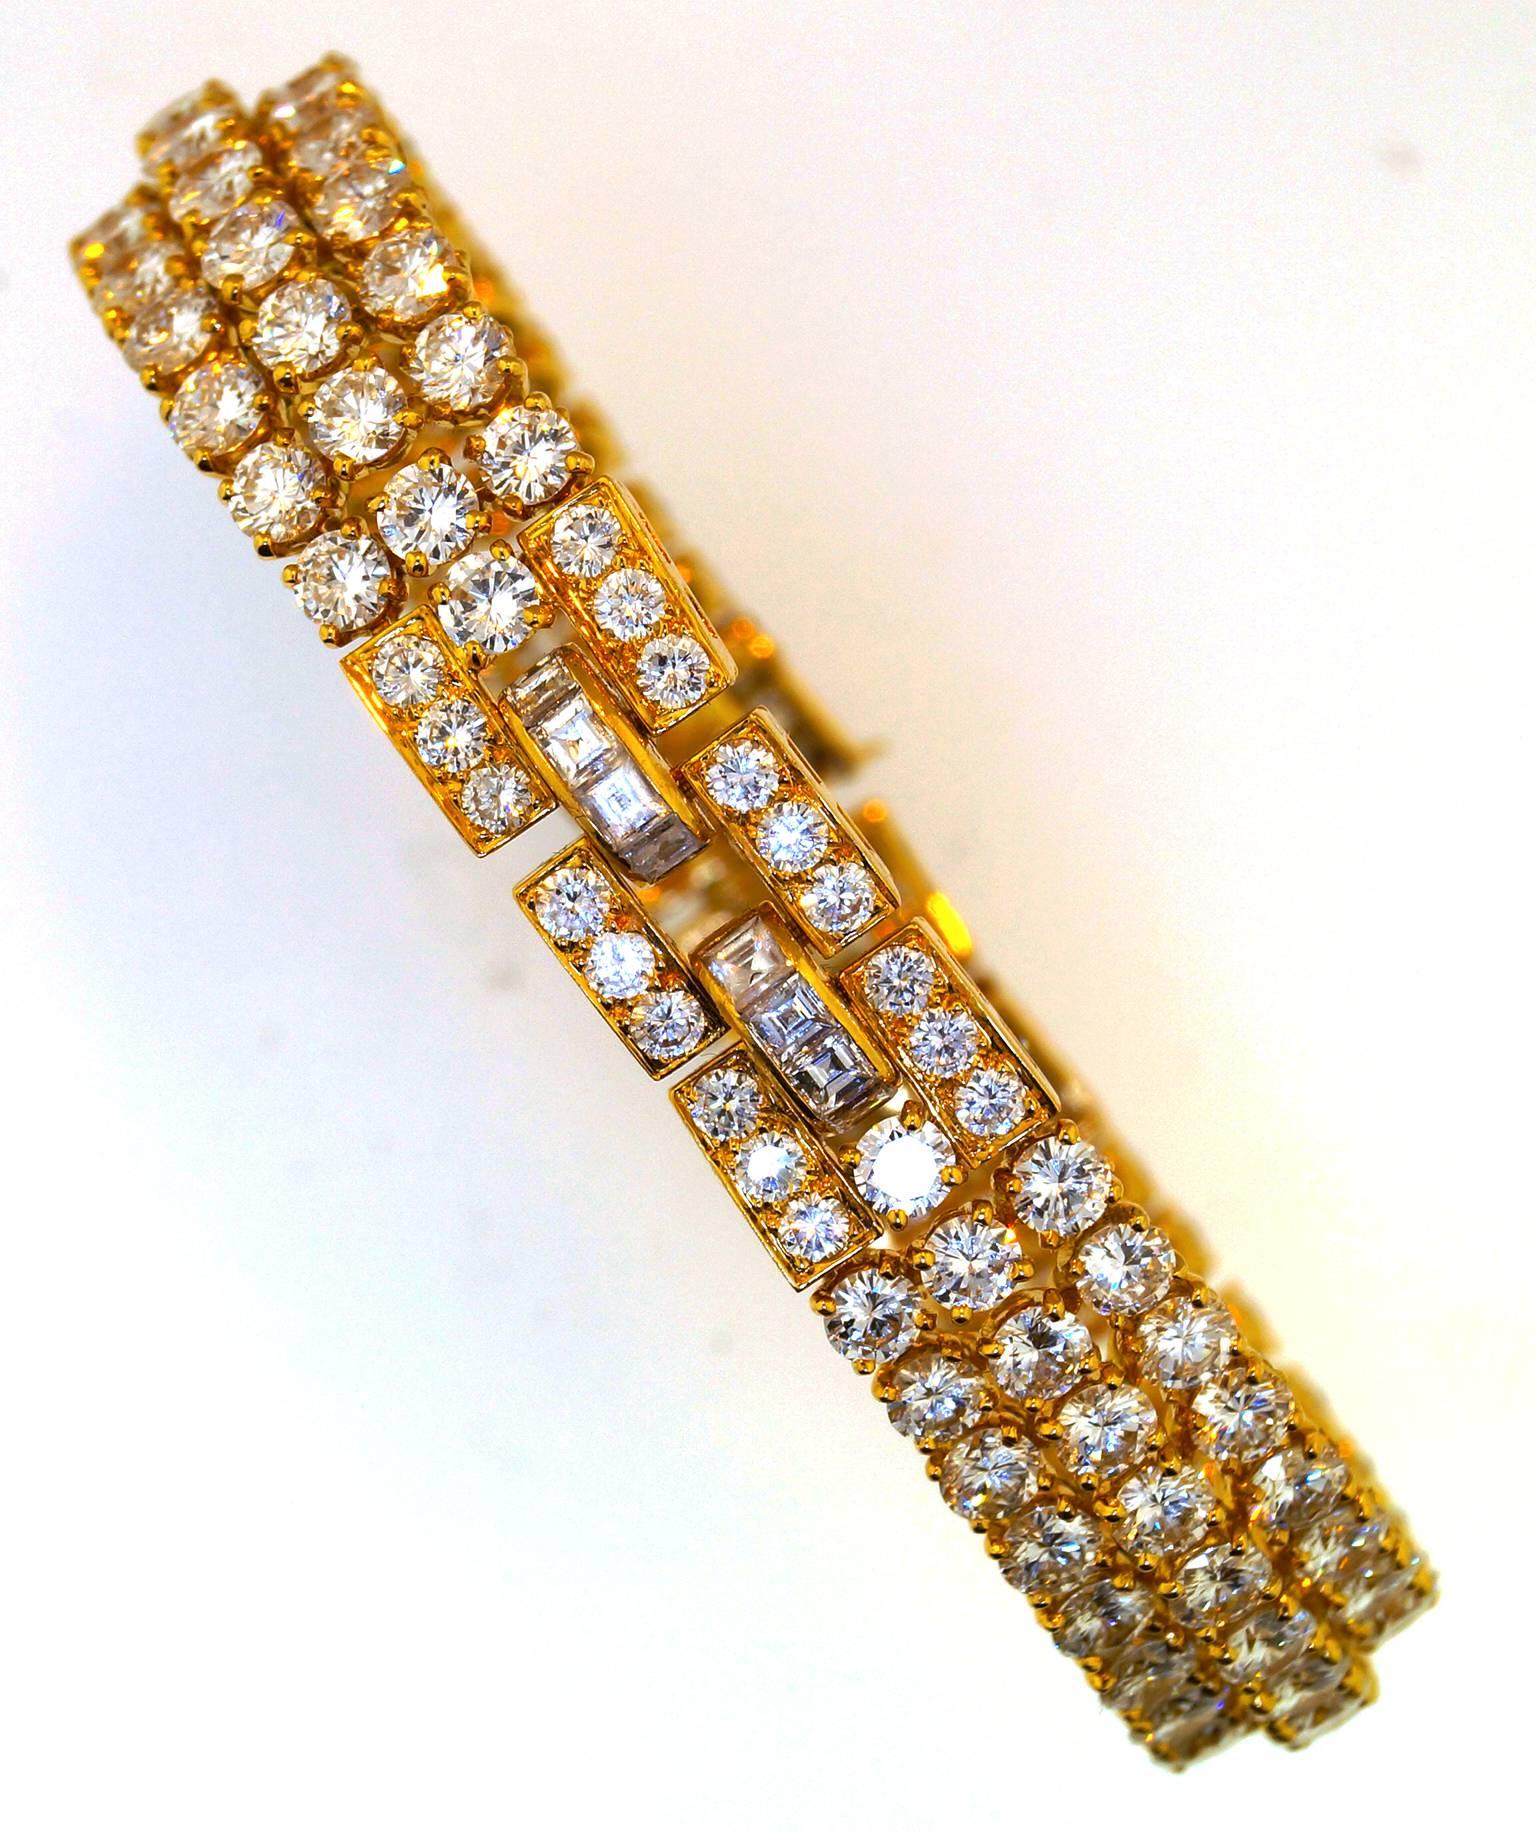 Beautiful lady's 18K Gold Diamond Bracelet.This Cartier bracelet holds approximately 22cts of round brillant diamonds weighing 25.1dwt. The bracelet is 7 inches long and has a secure clasp with a safety.